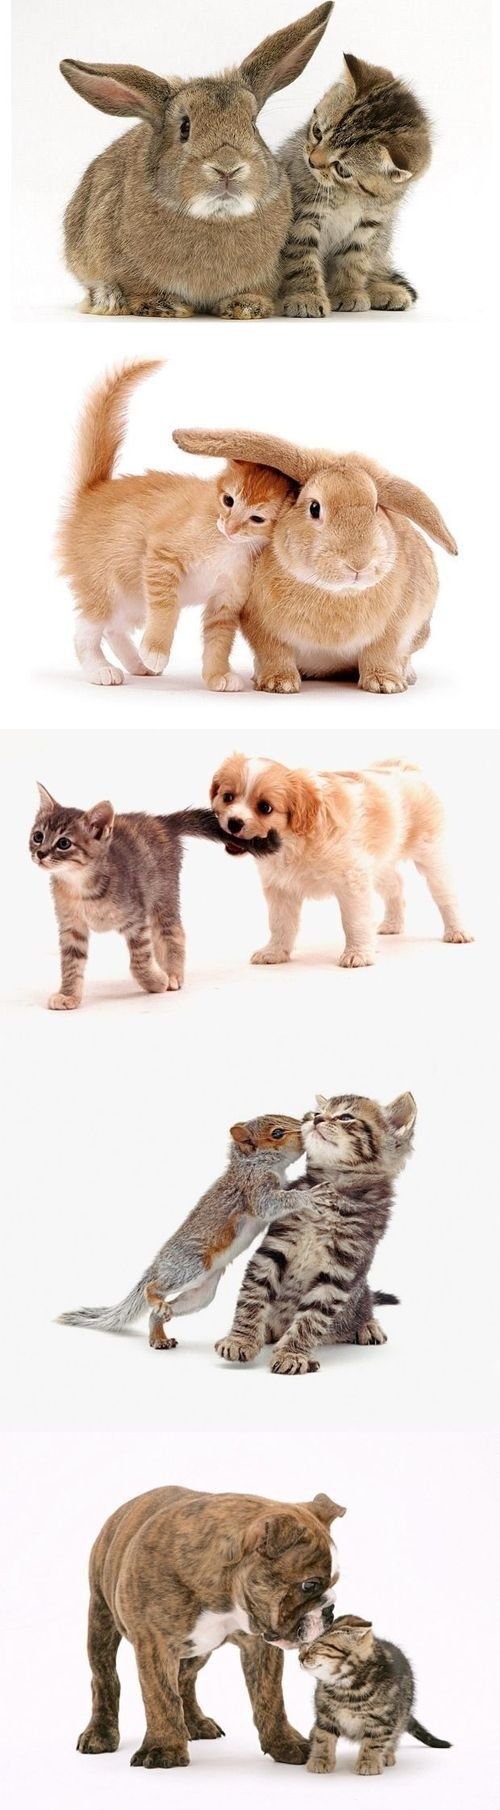 Here is todays cute animal overload | Awesomely Cute, Cute Kittens, Cute Puppies, Cute Animals, Cute Babies and Cute Things in